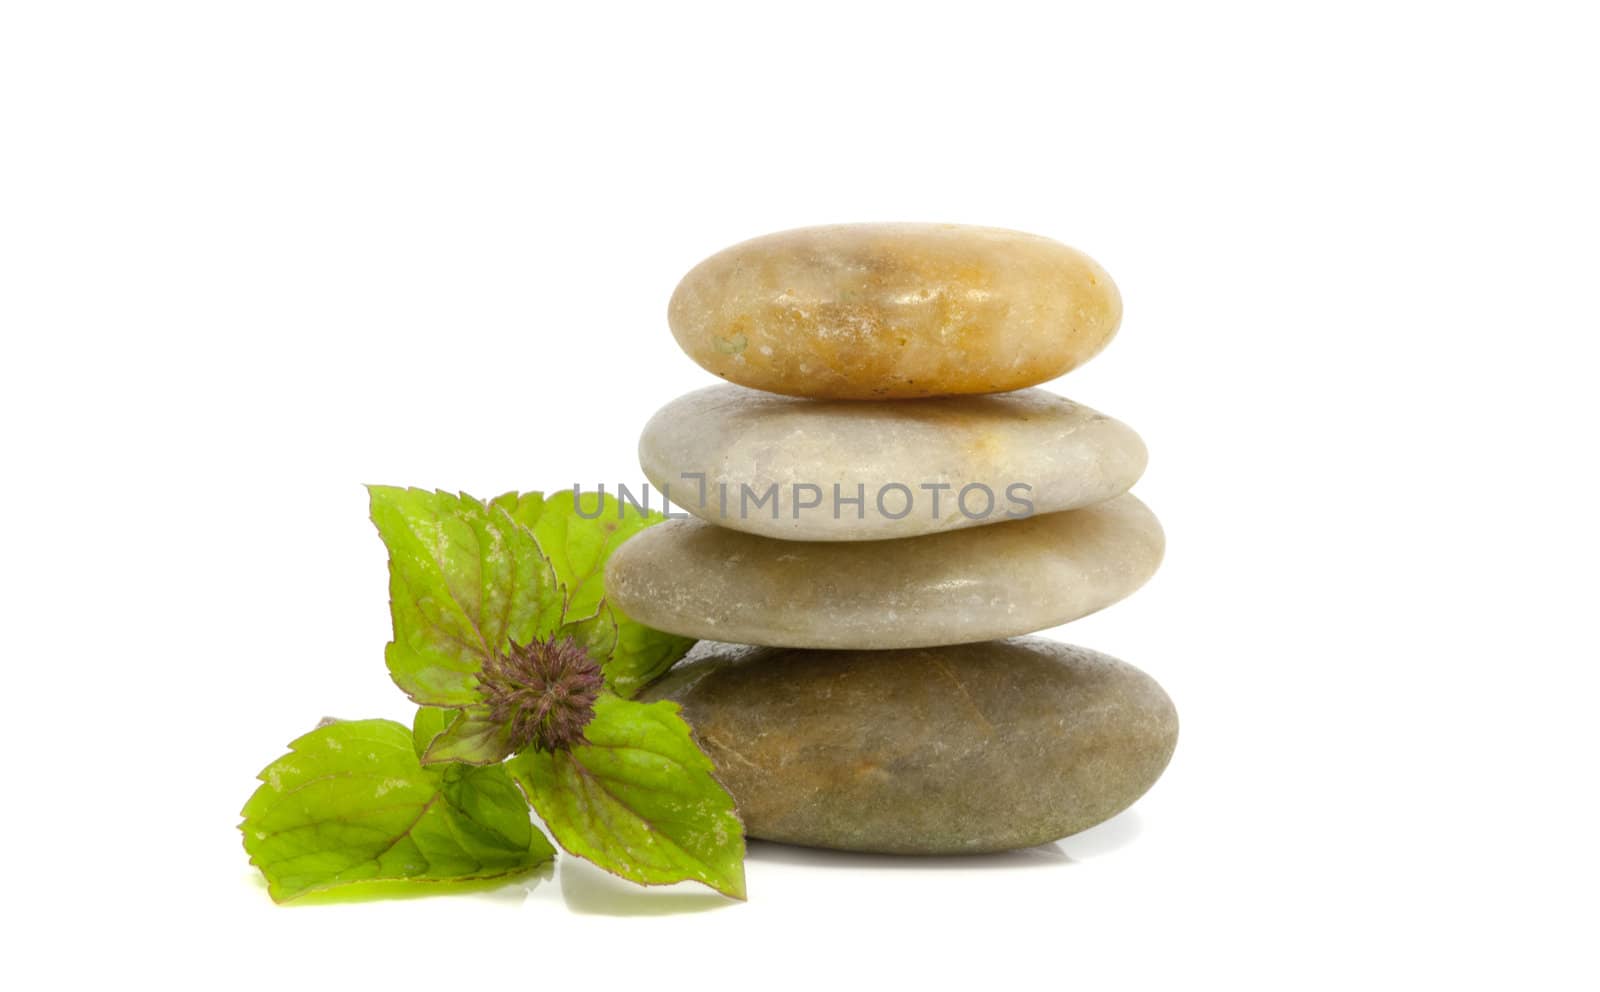 rocks with mint by compuinfoto